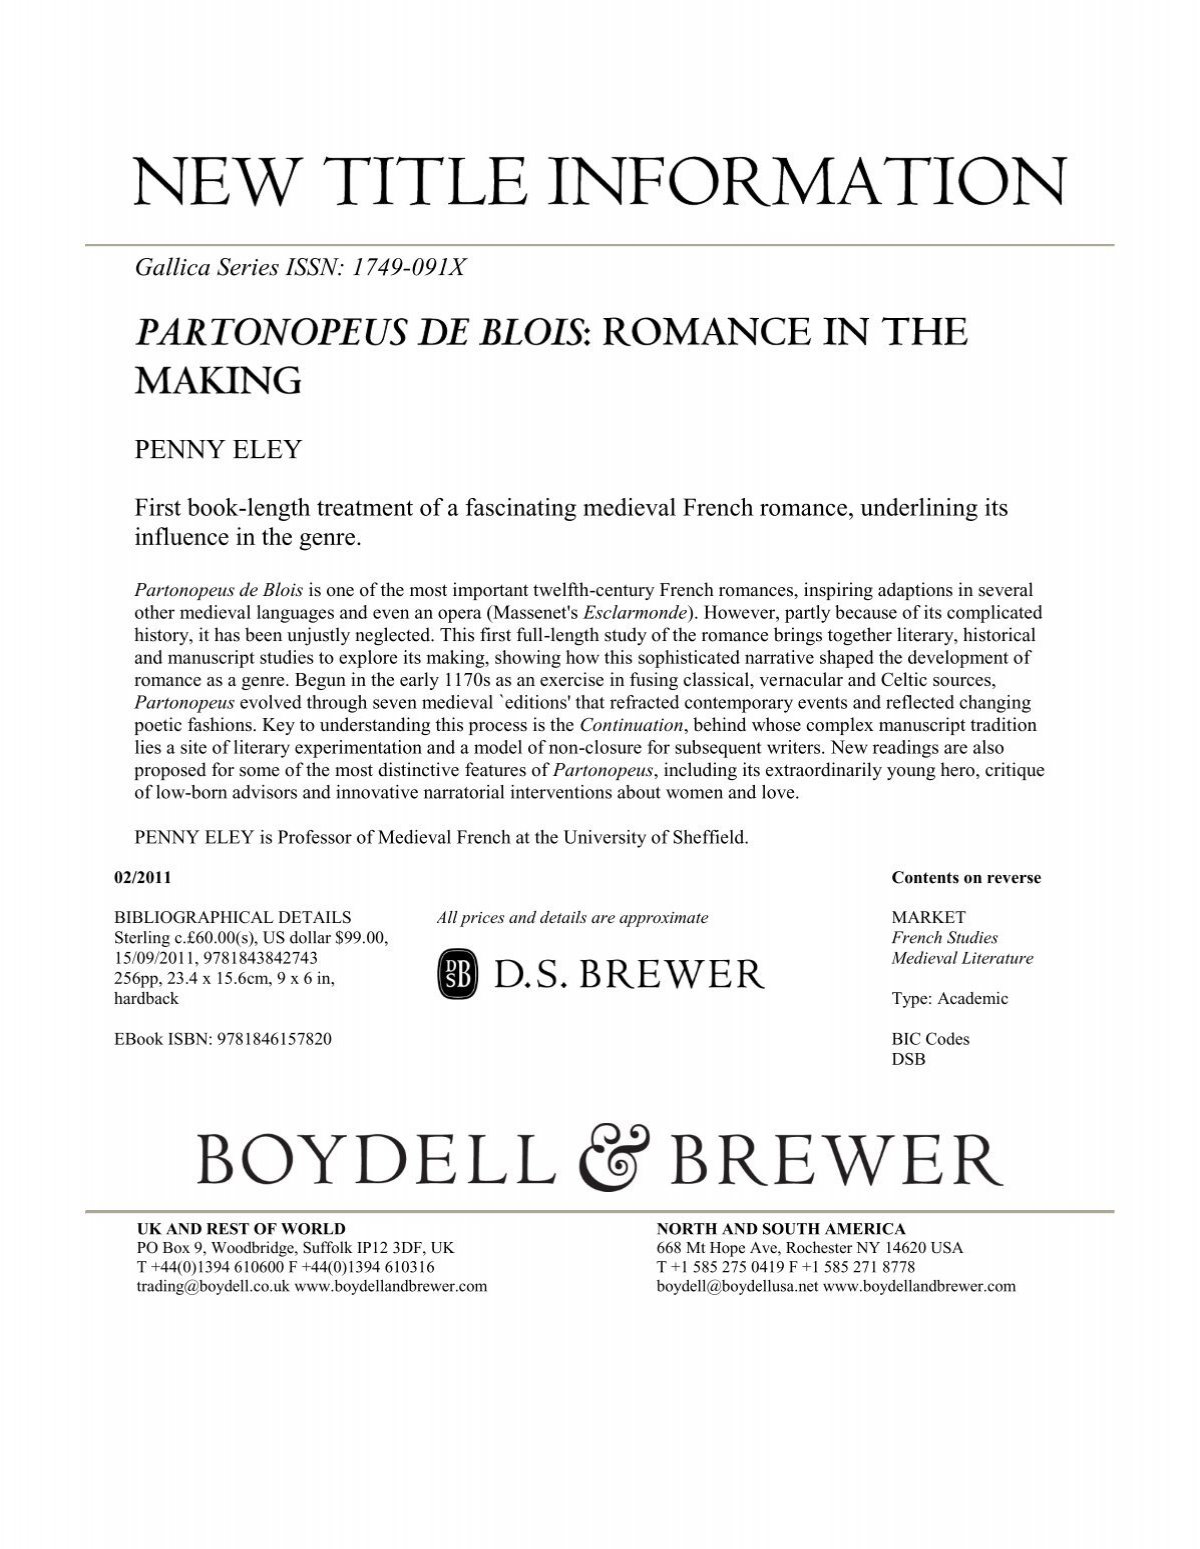 Book Details - Boydell and Brewer